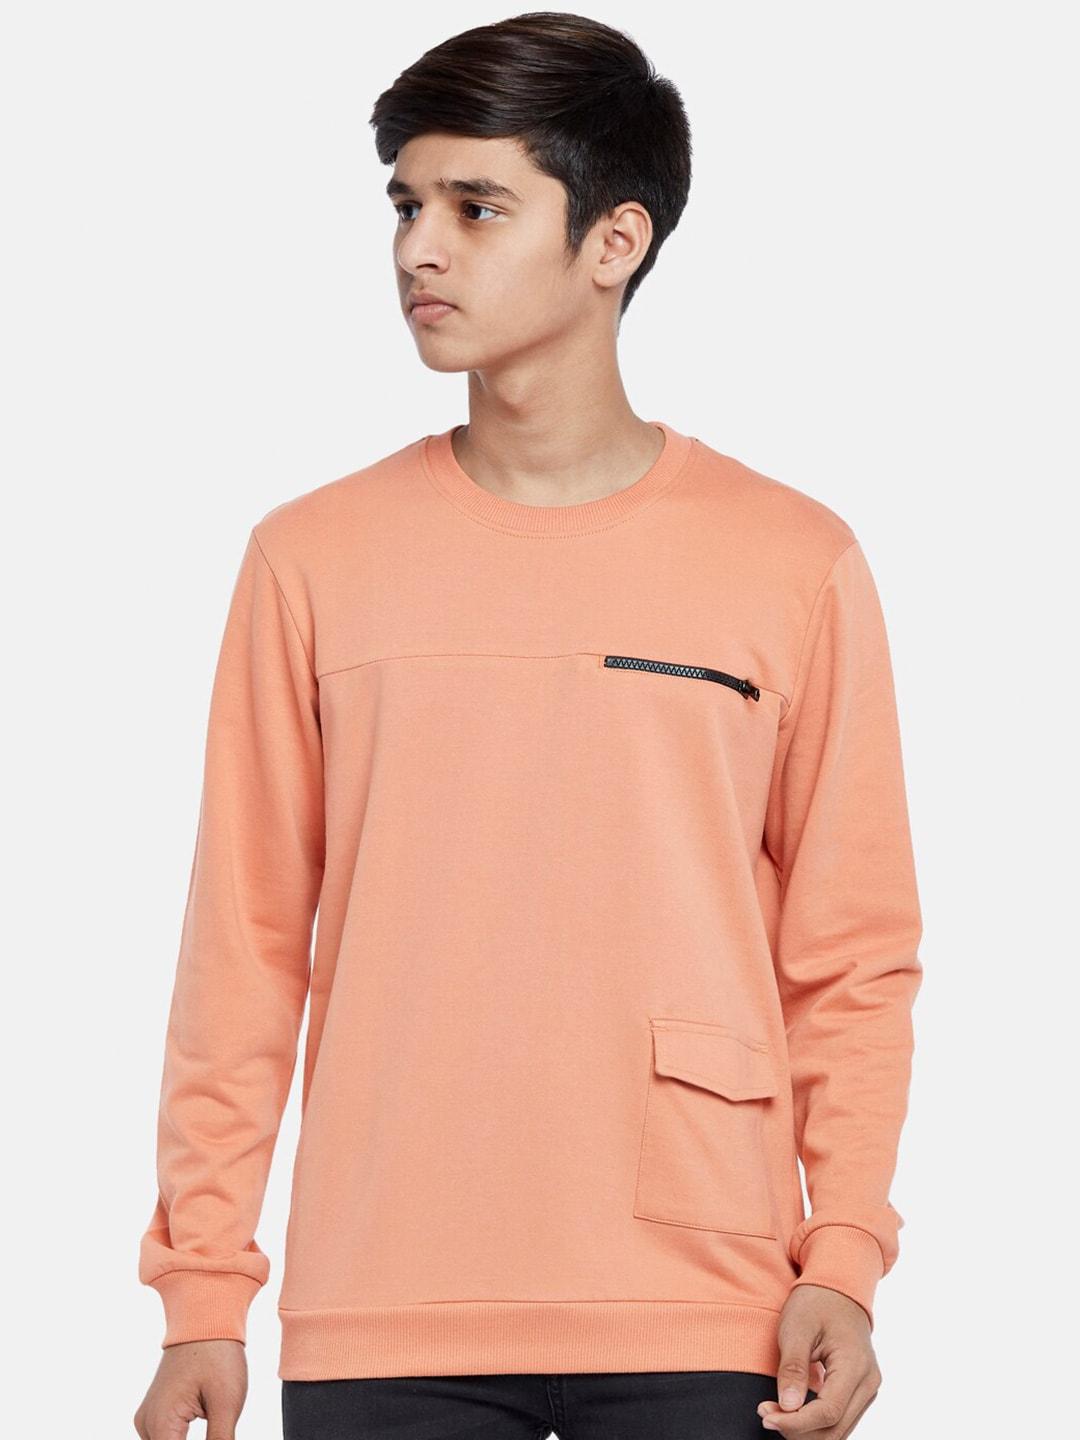 coolsters-by-pantaloons-boys-coral-solid-cotton-sweatshirt